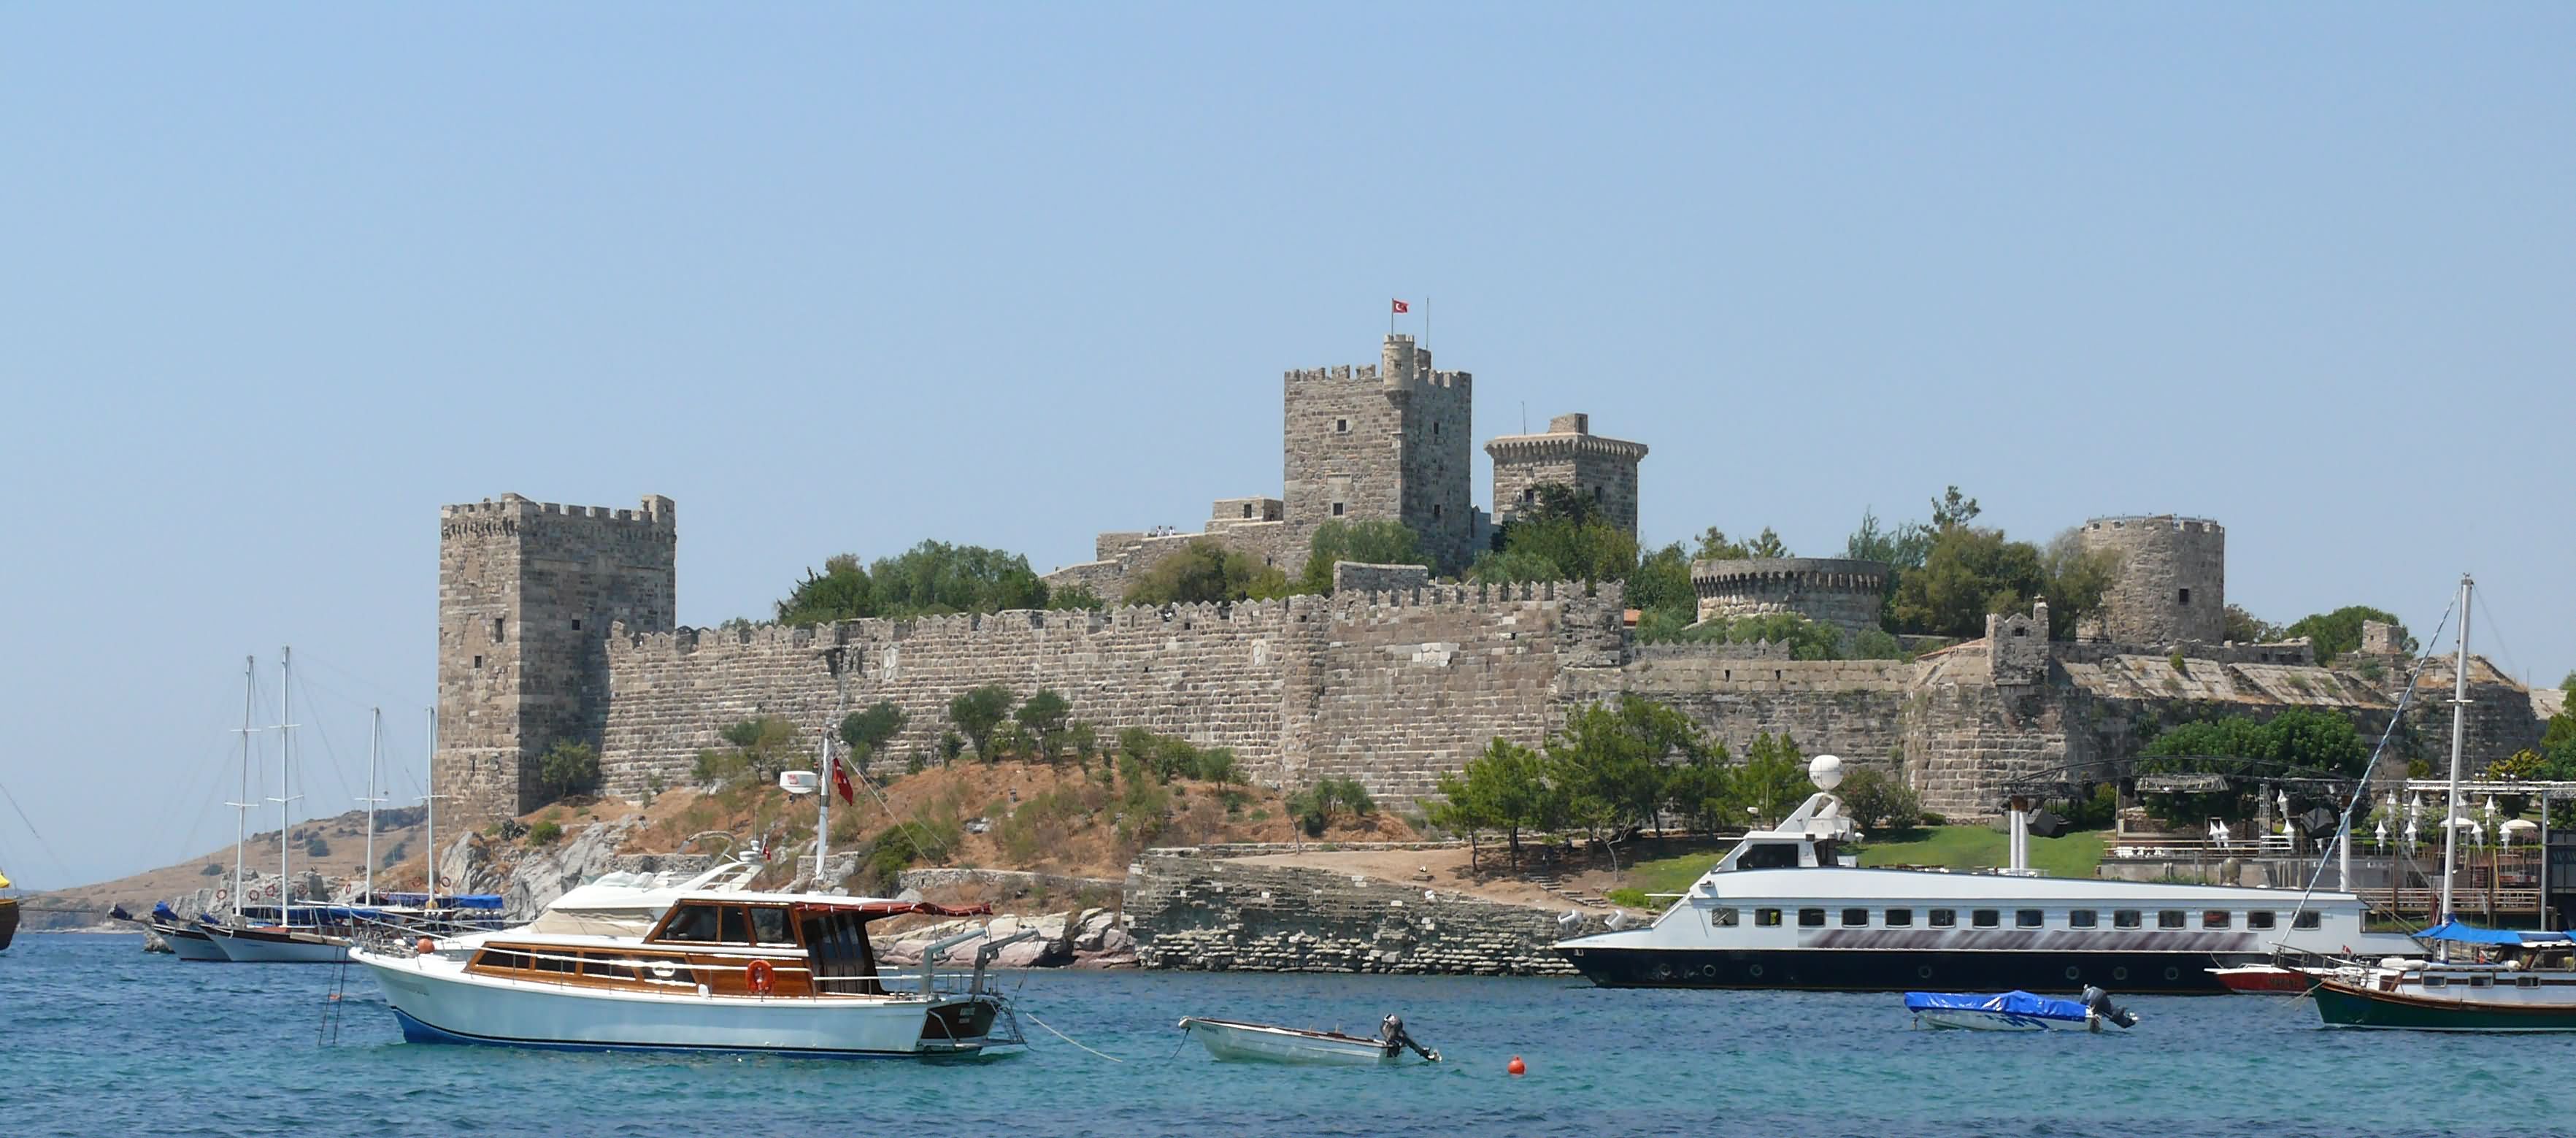 Boats And Bodrum Castle Picture